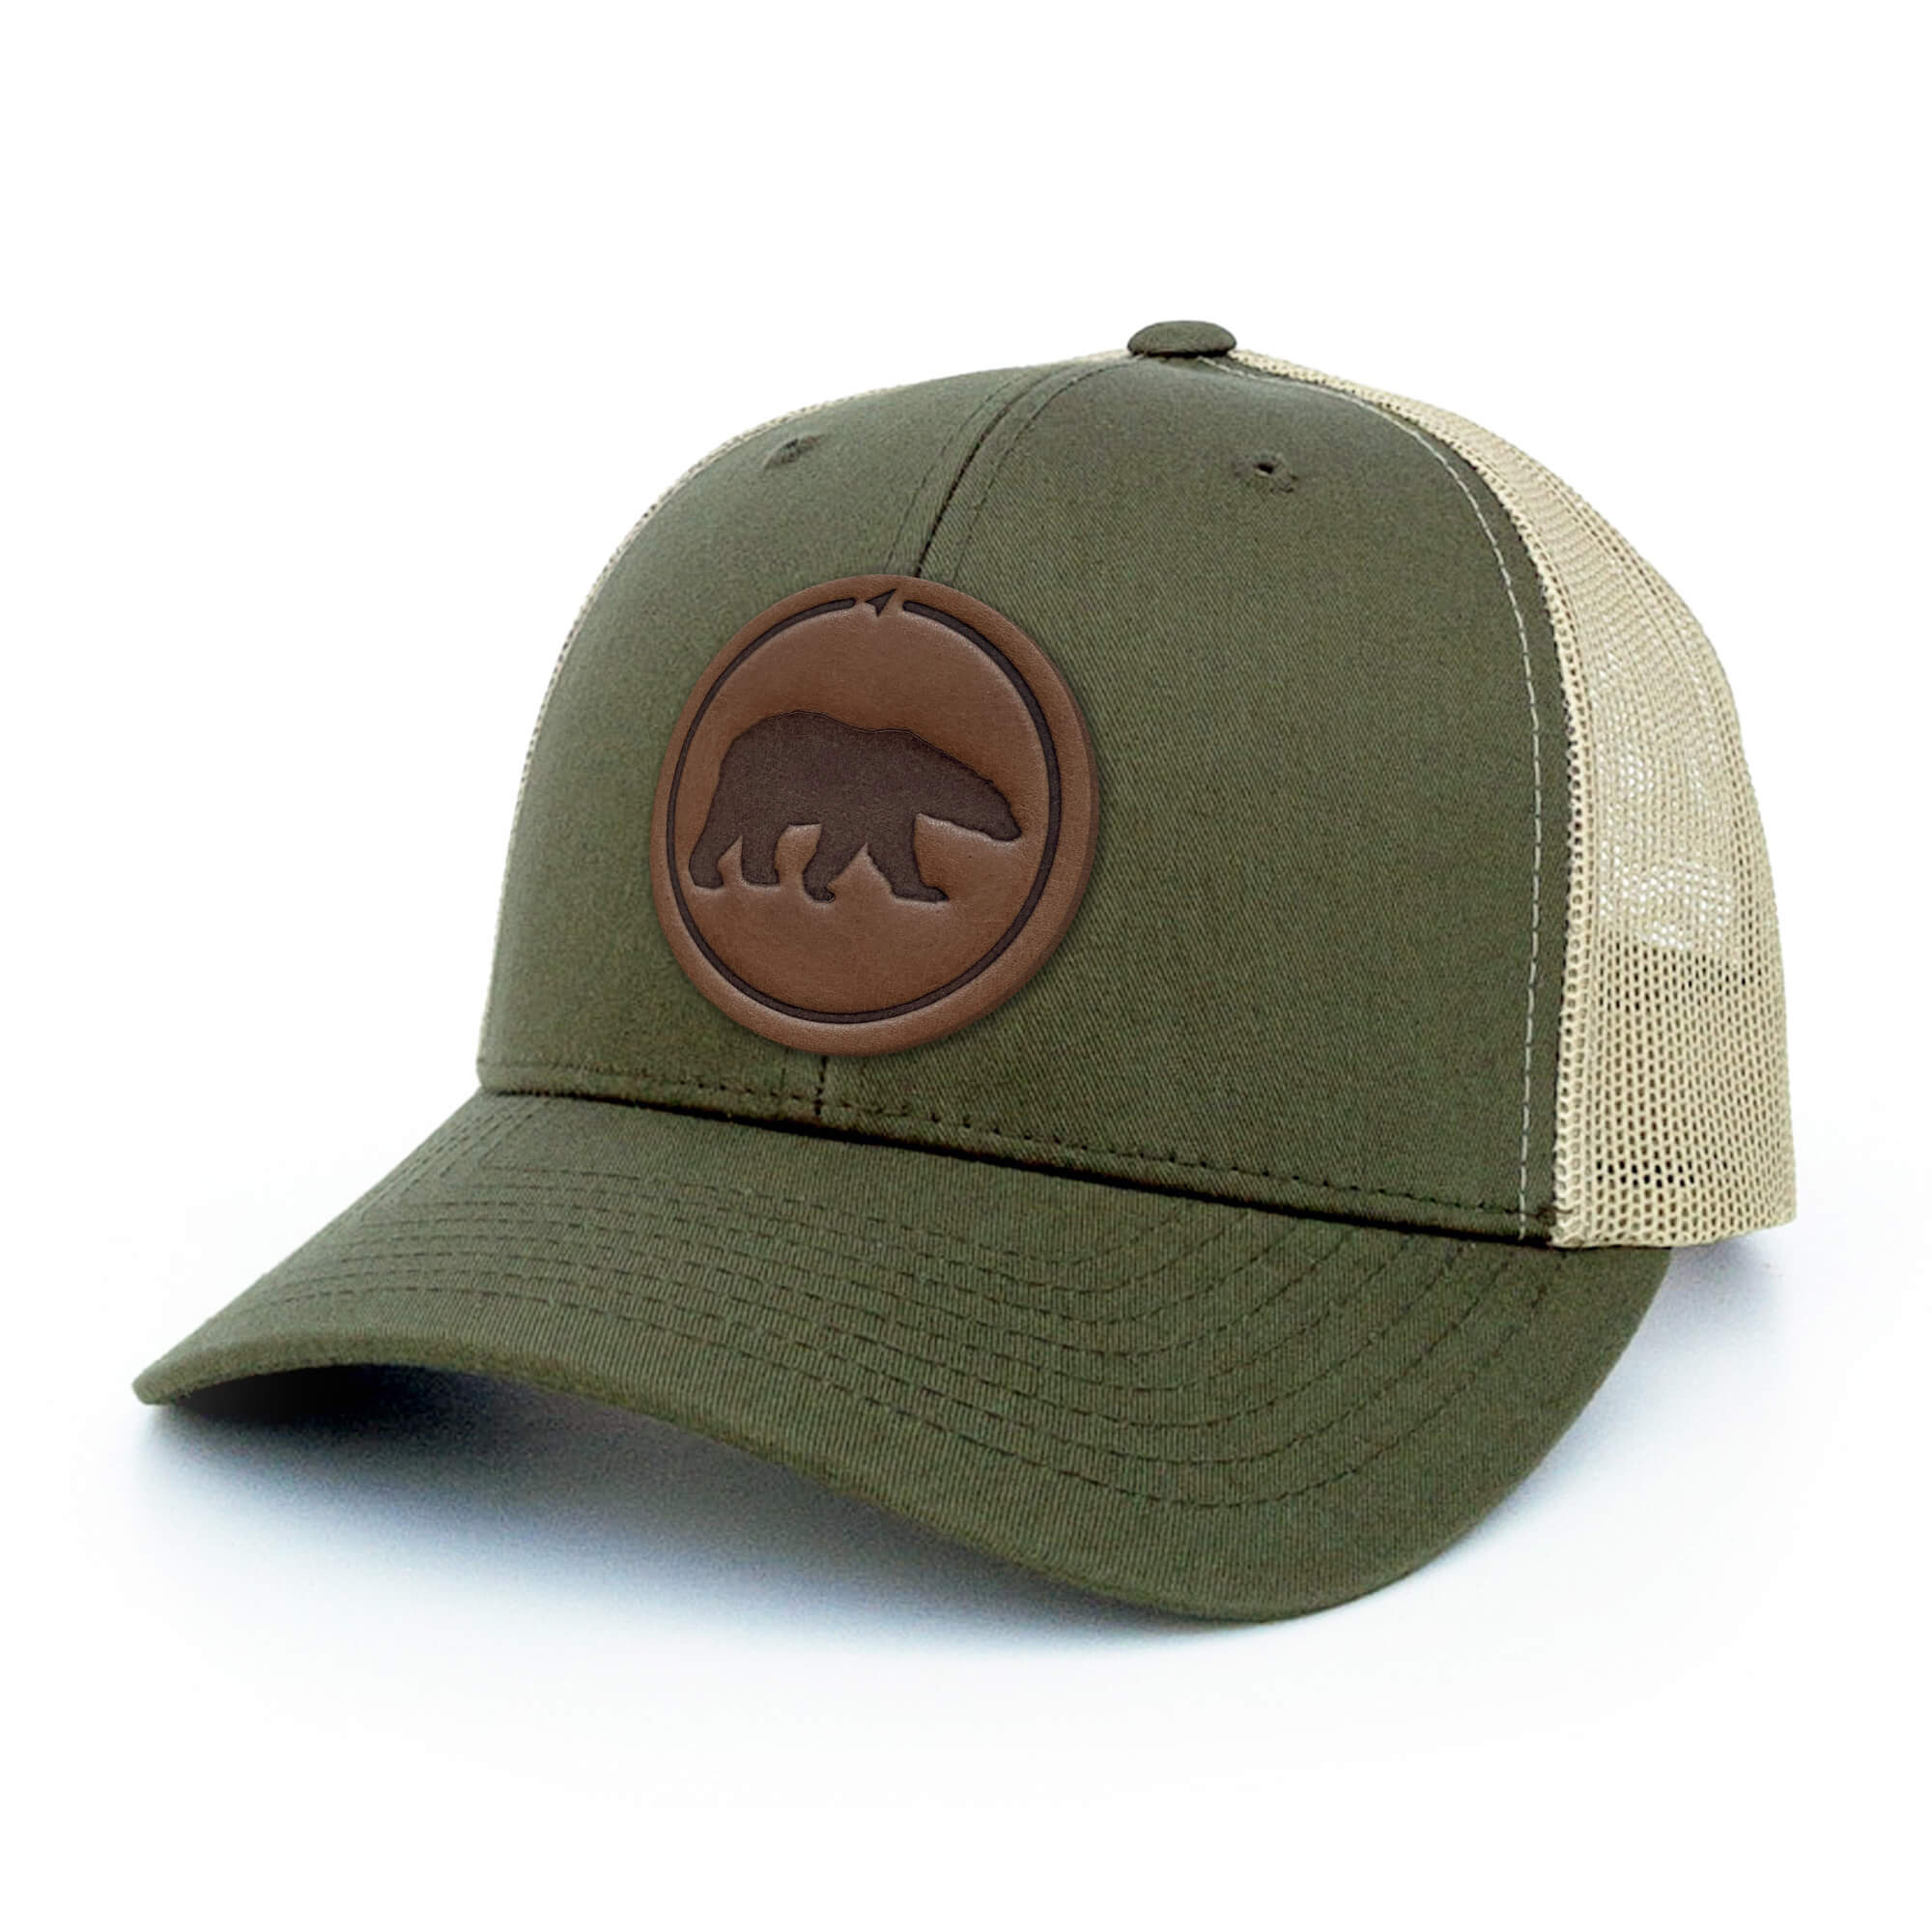 Moss and Khaki trucker hat with full-grain leather patch of a Polar Bear | BLACK-004-003, CHARC-004-003, NAVY-004-003, HGREY-004-003, MOSS-004-003, BROWN-004-003